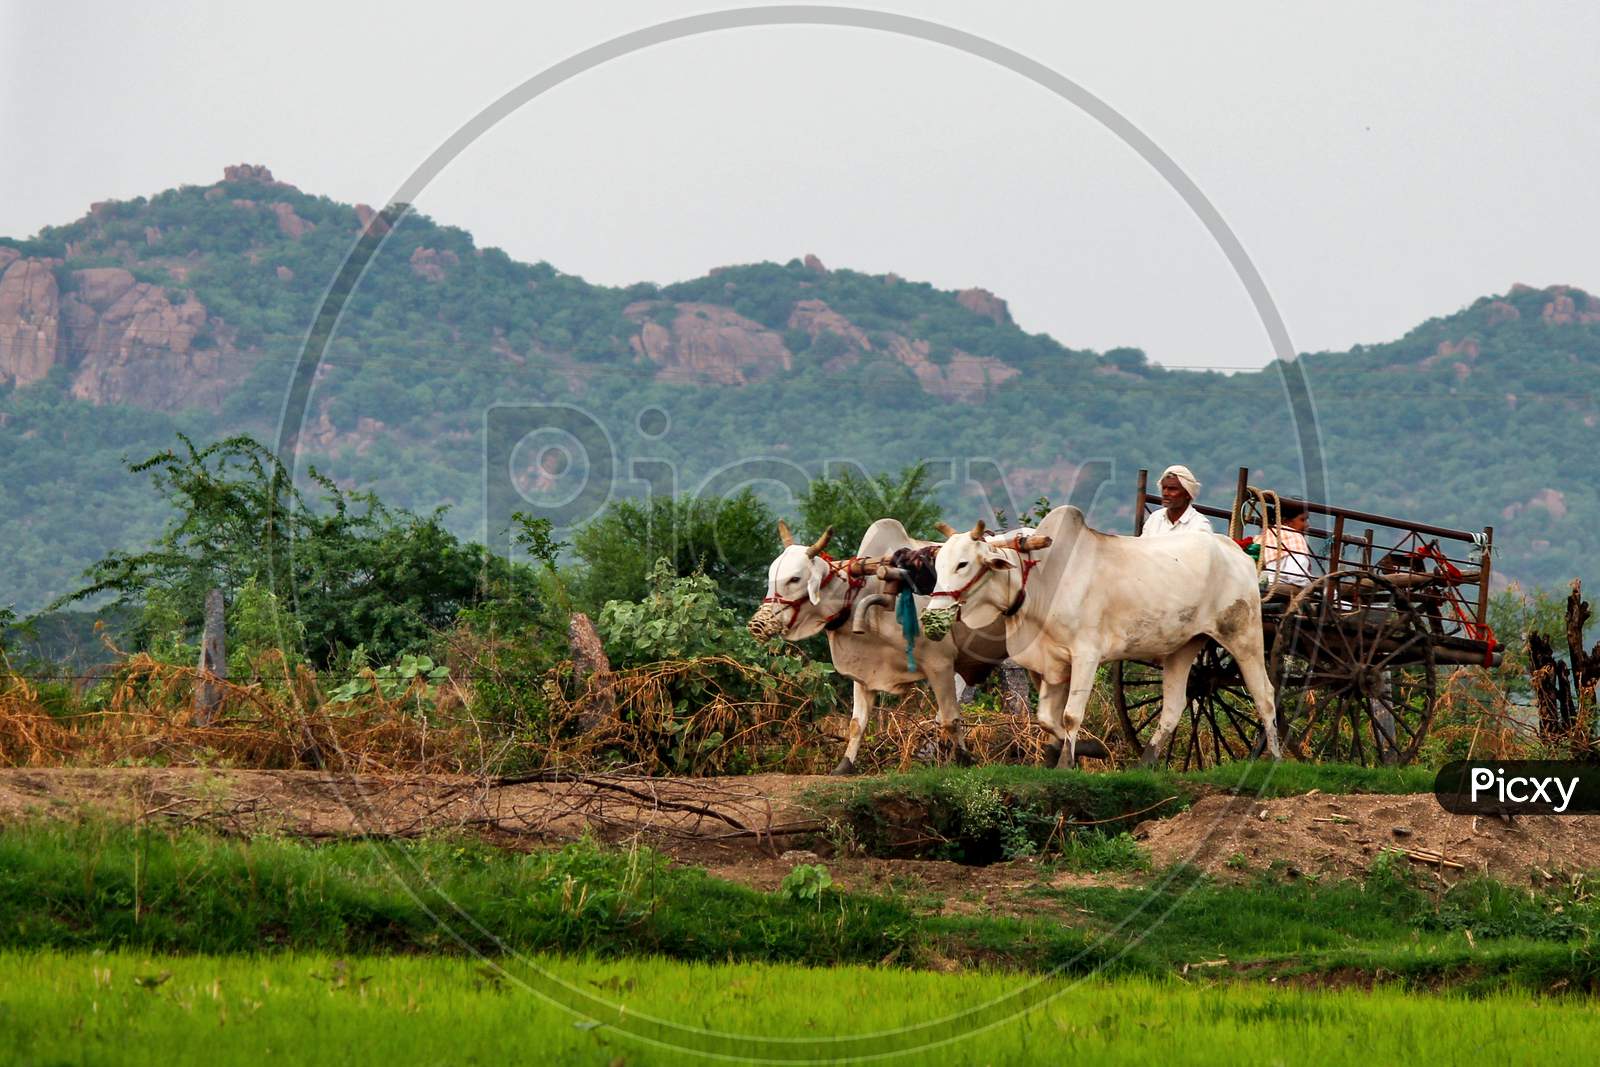 Villagers going home on bullock cart